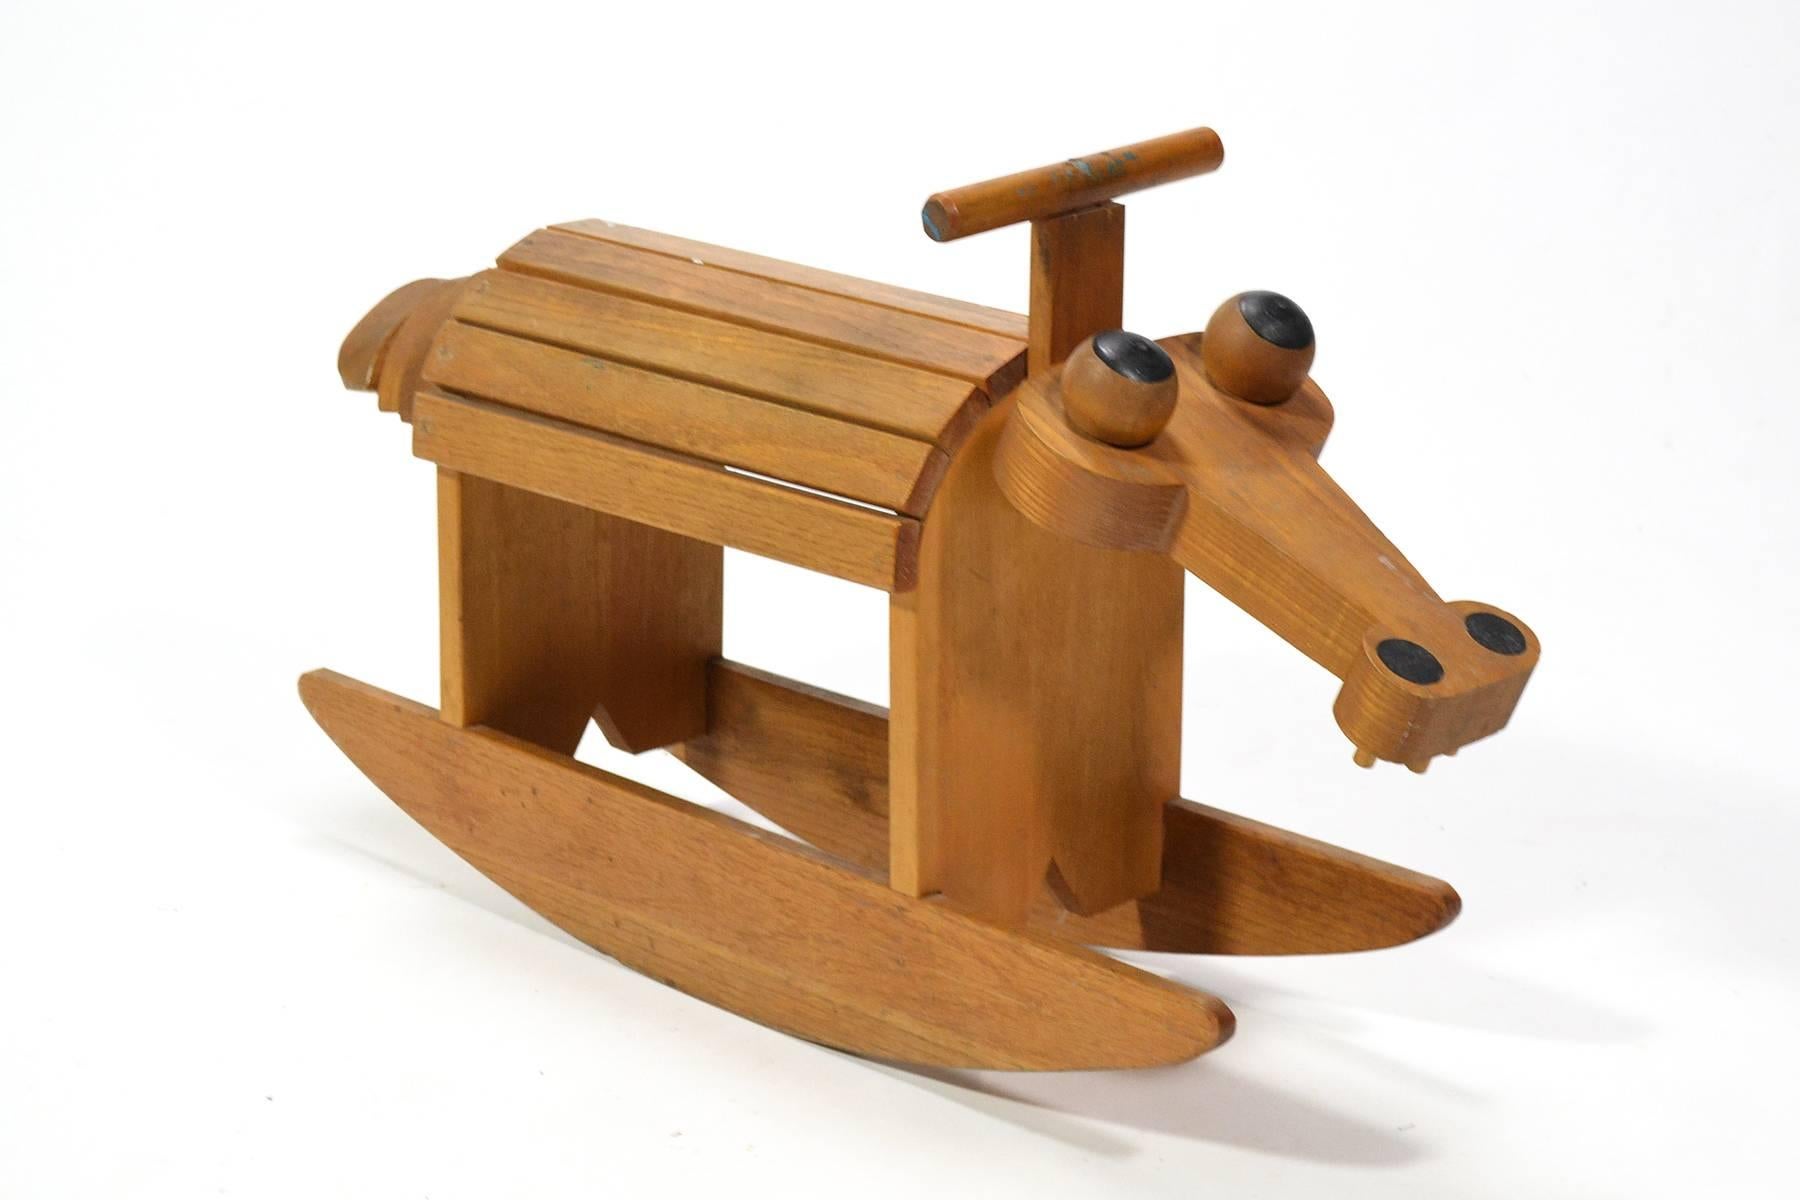 A terrific piece for kids to play with and a visual delight for adults, this handcrafted hobby horse in the form of a fanciful creature (perhaps an alligator) is well built in addition to being a wonderful design.